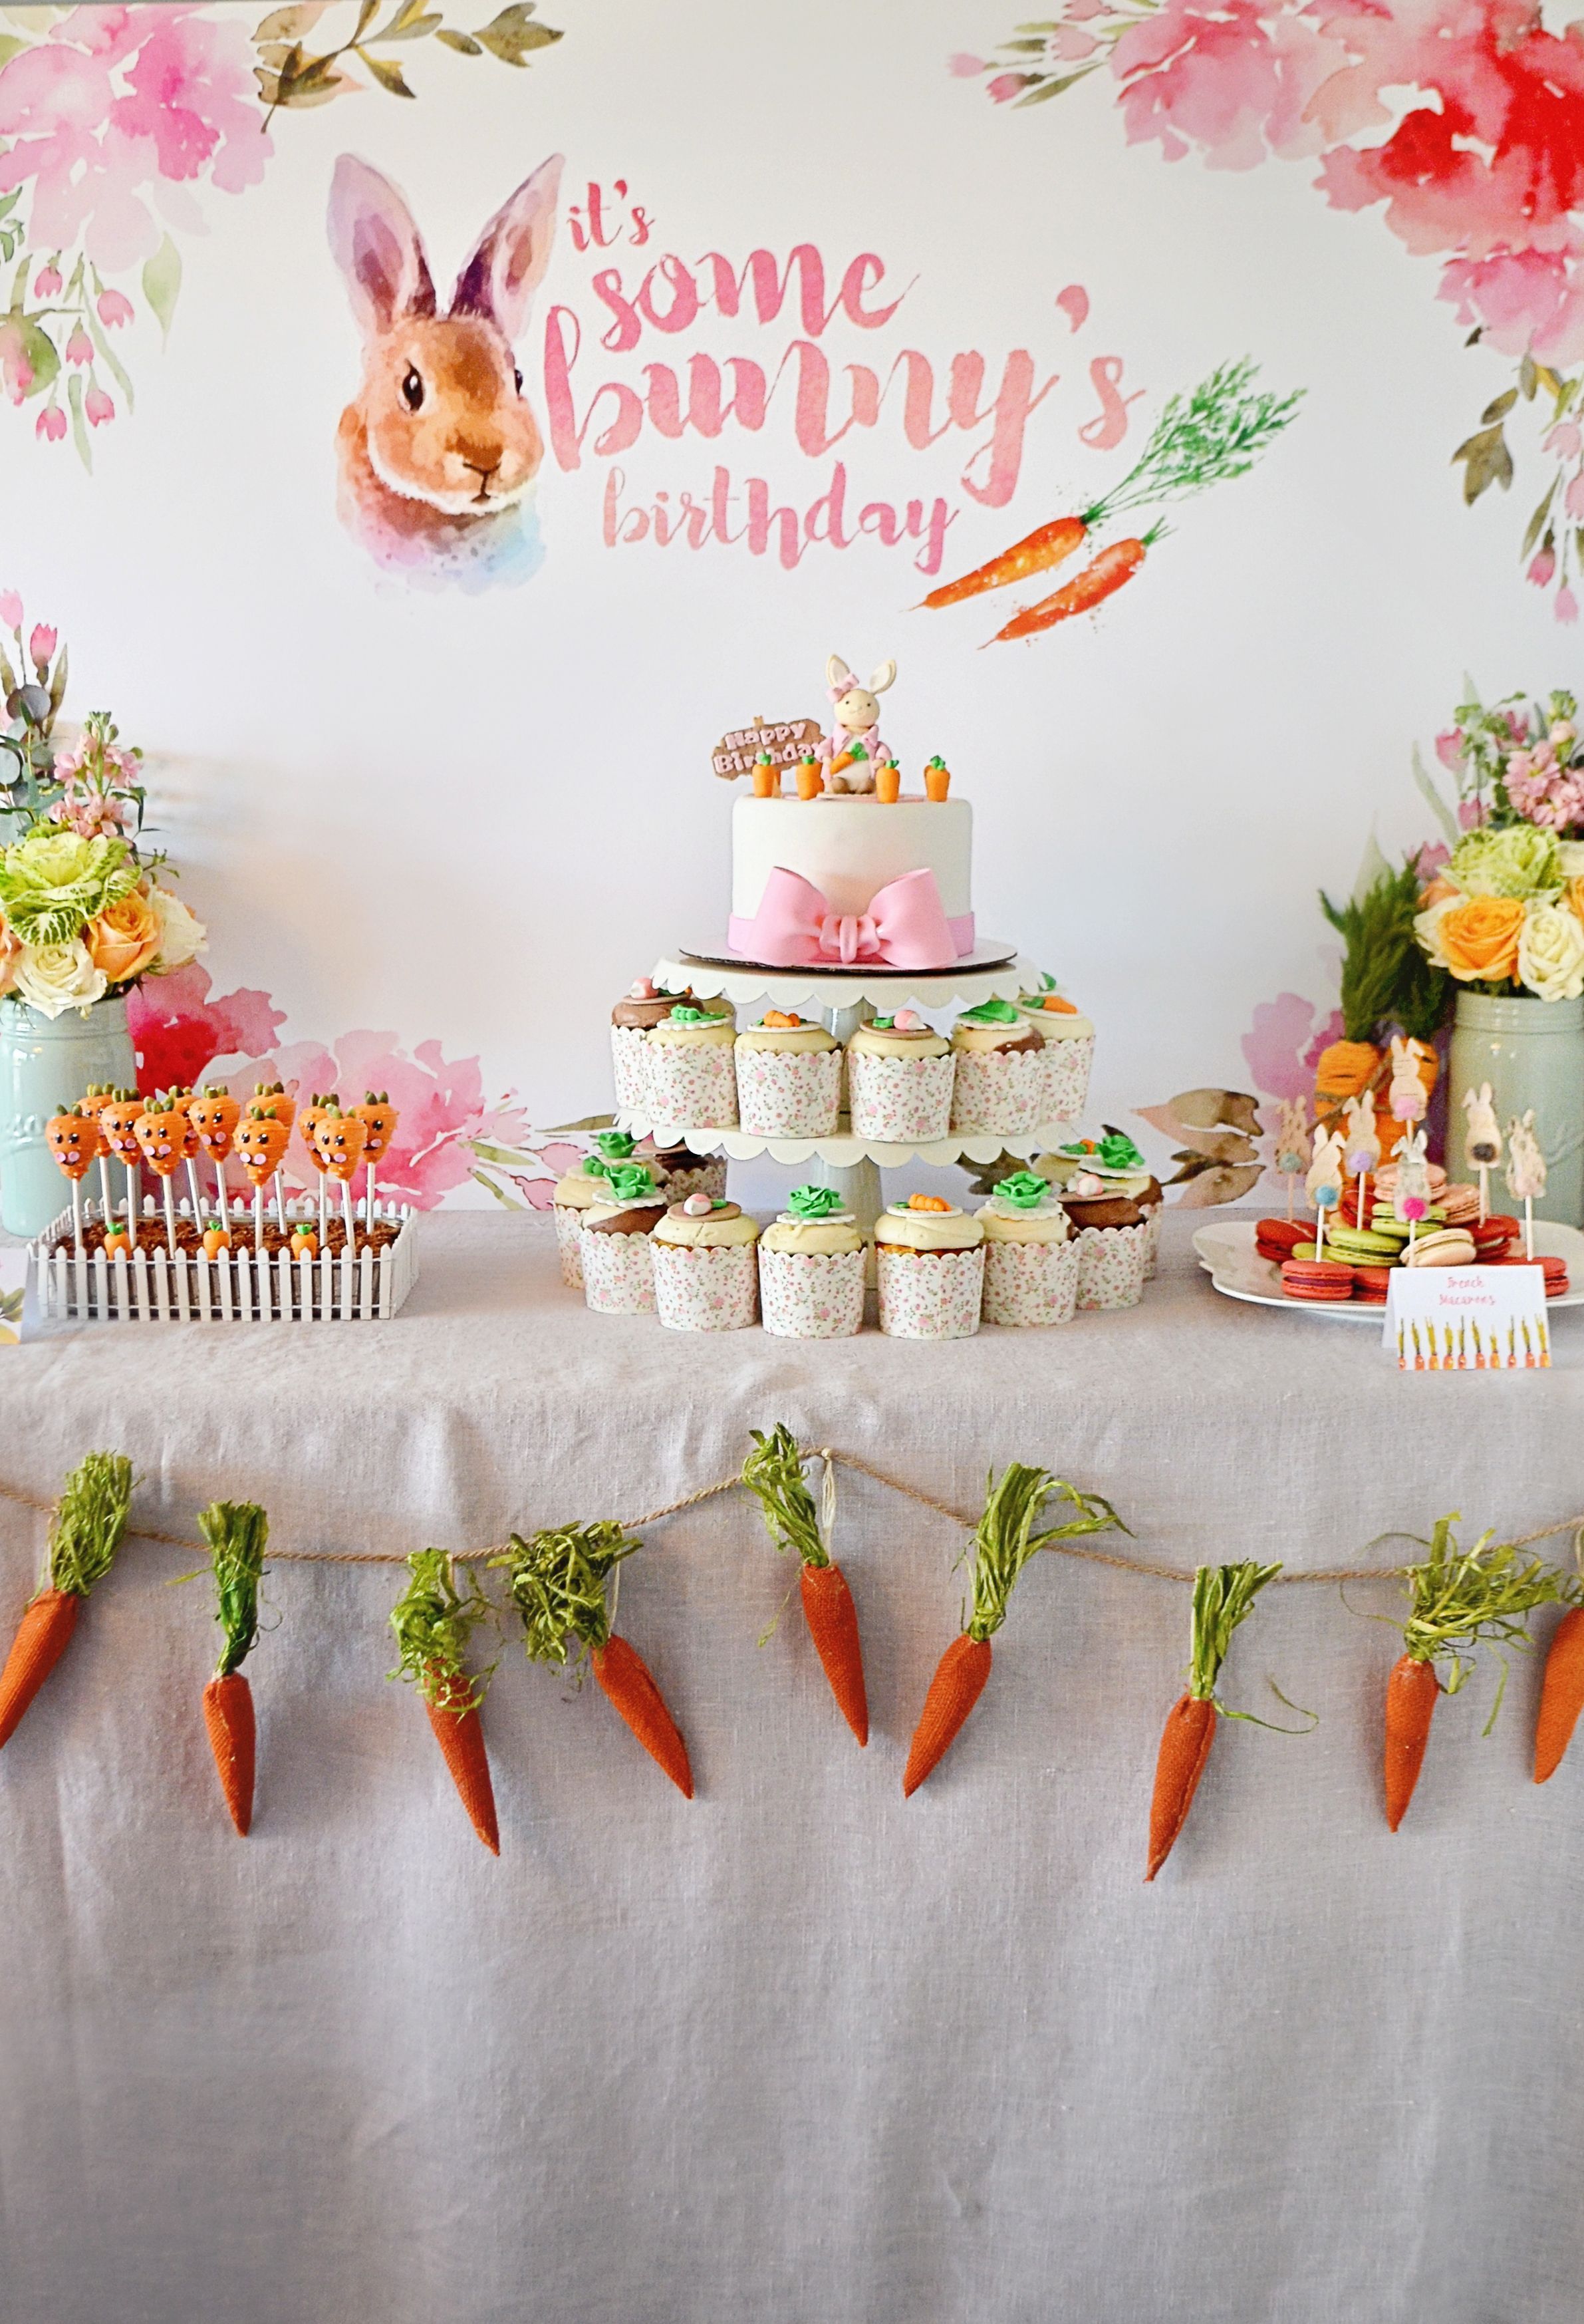 Bunny-Themed Birthday Party – cute ideas for a spring kids party!